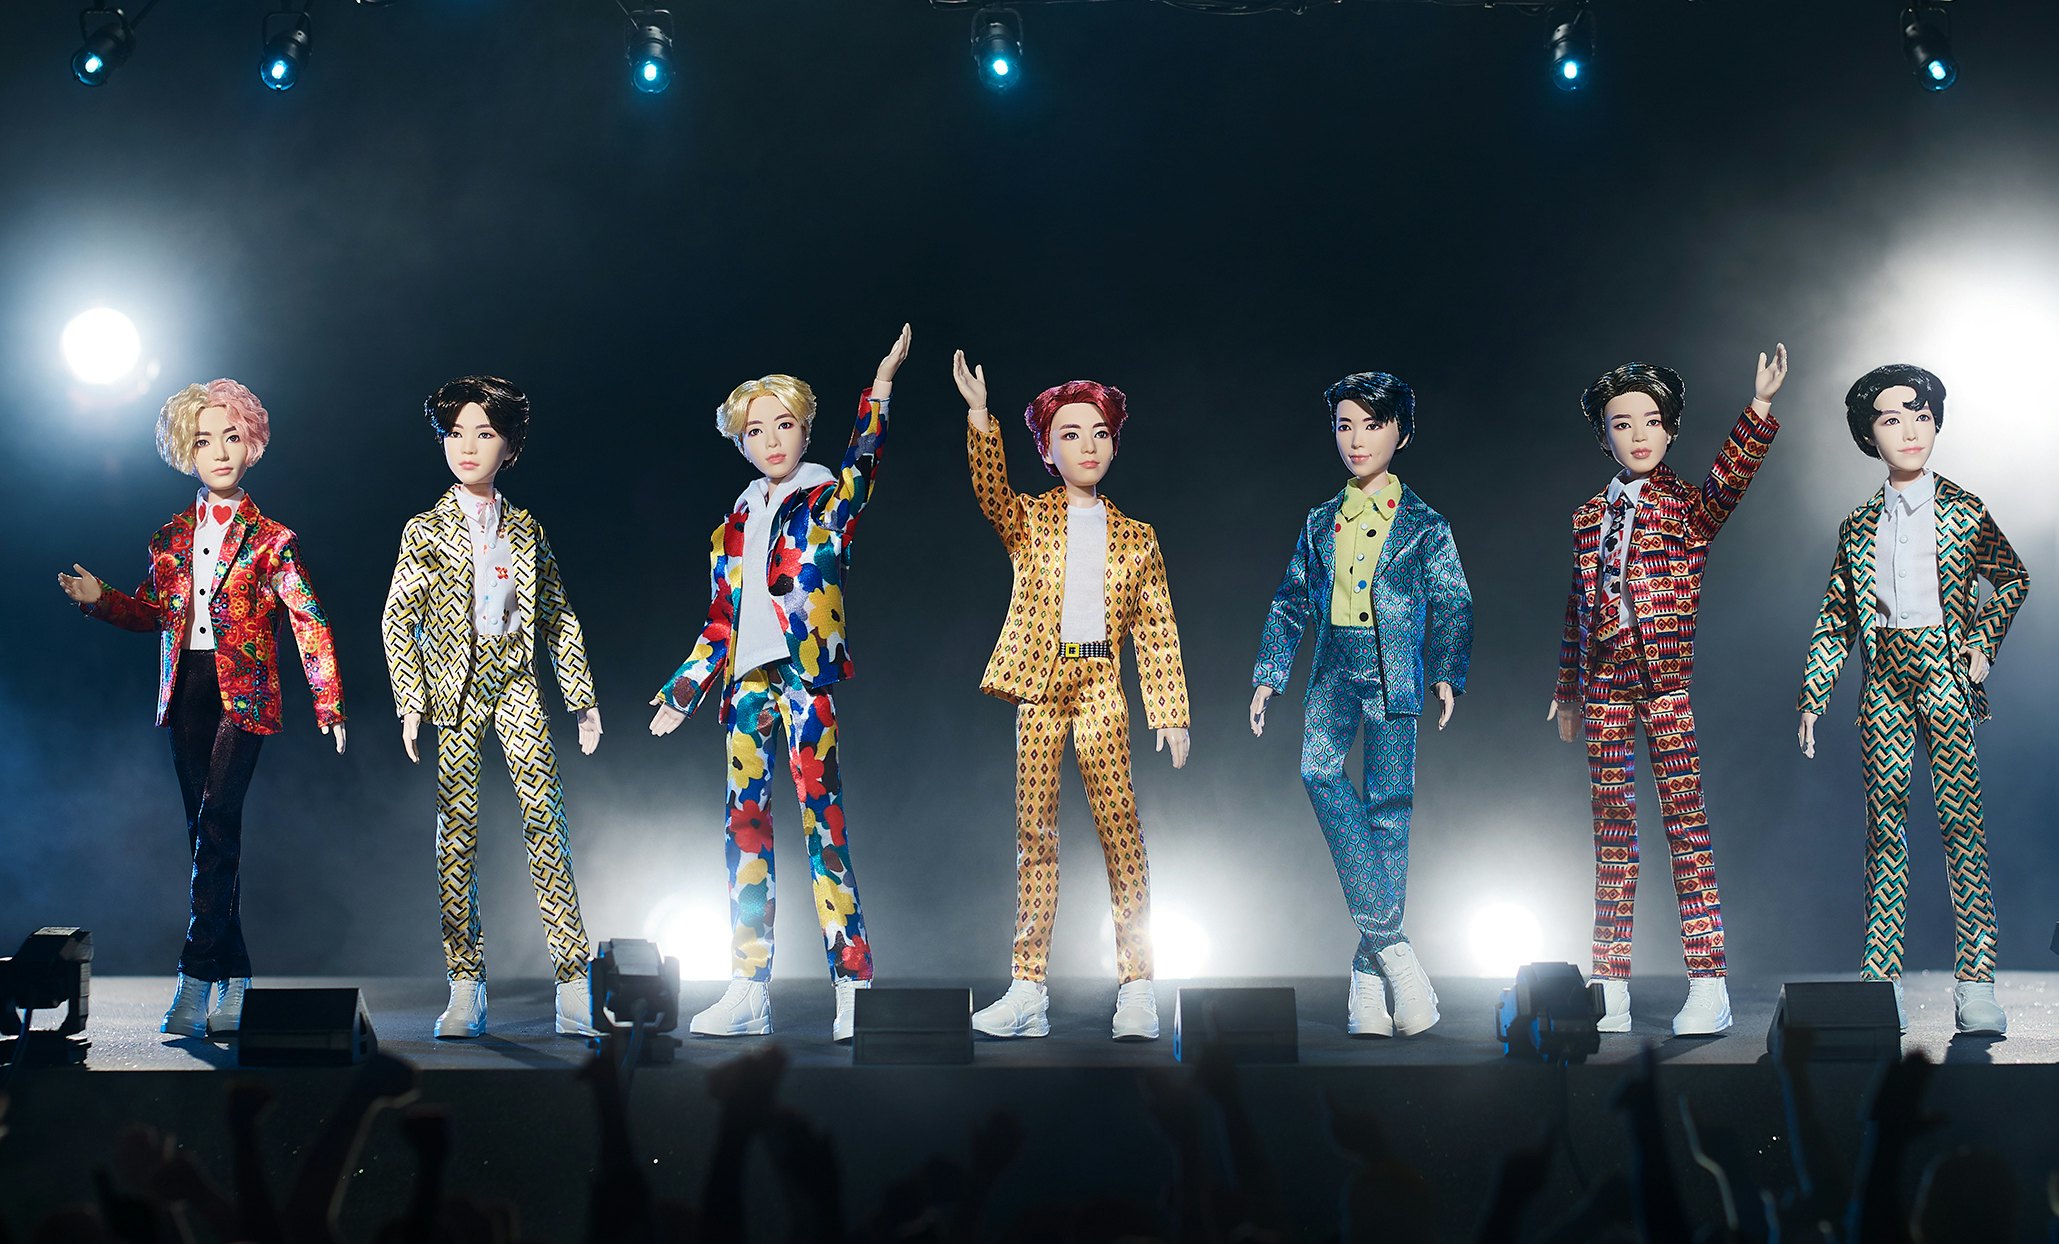 The BTS Mattel Dolls and Uno Game Are Officially Available to Preorder